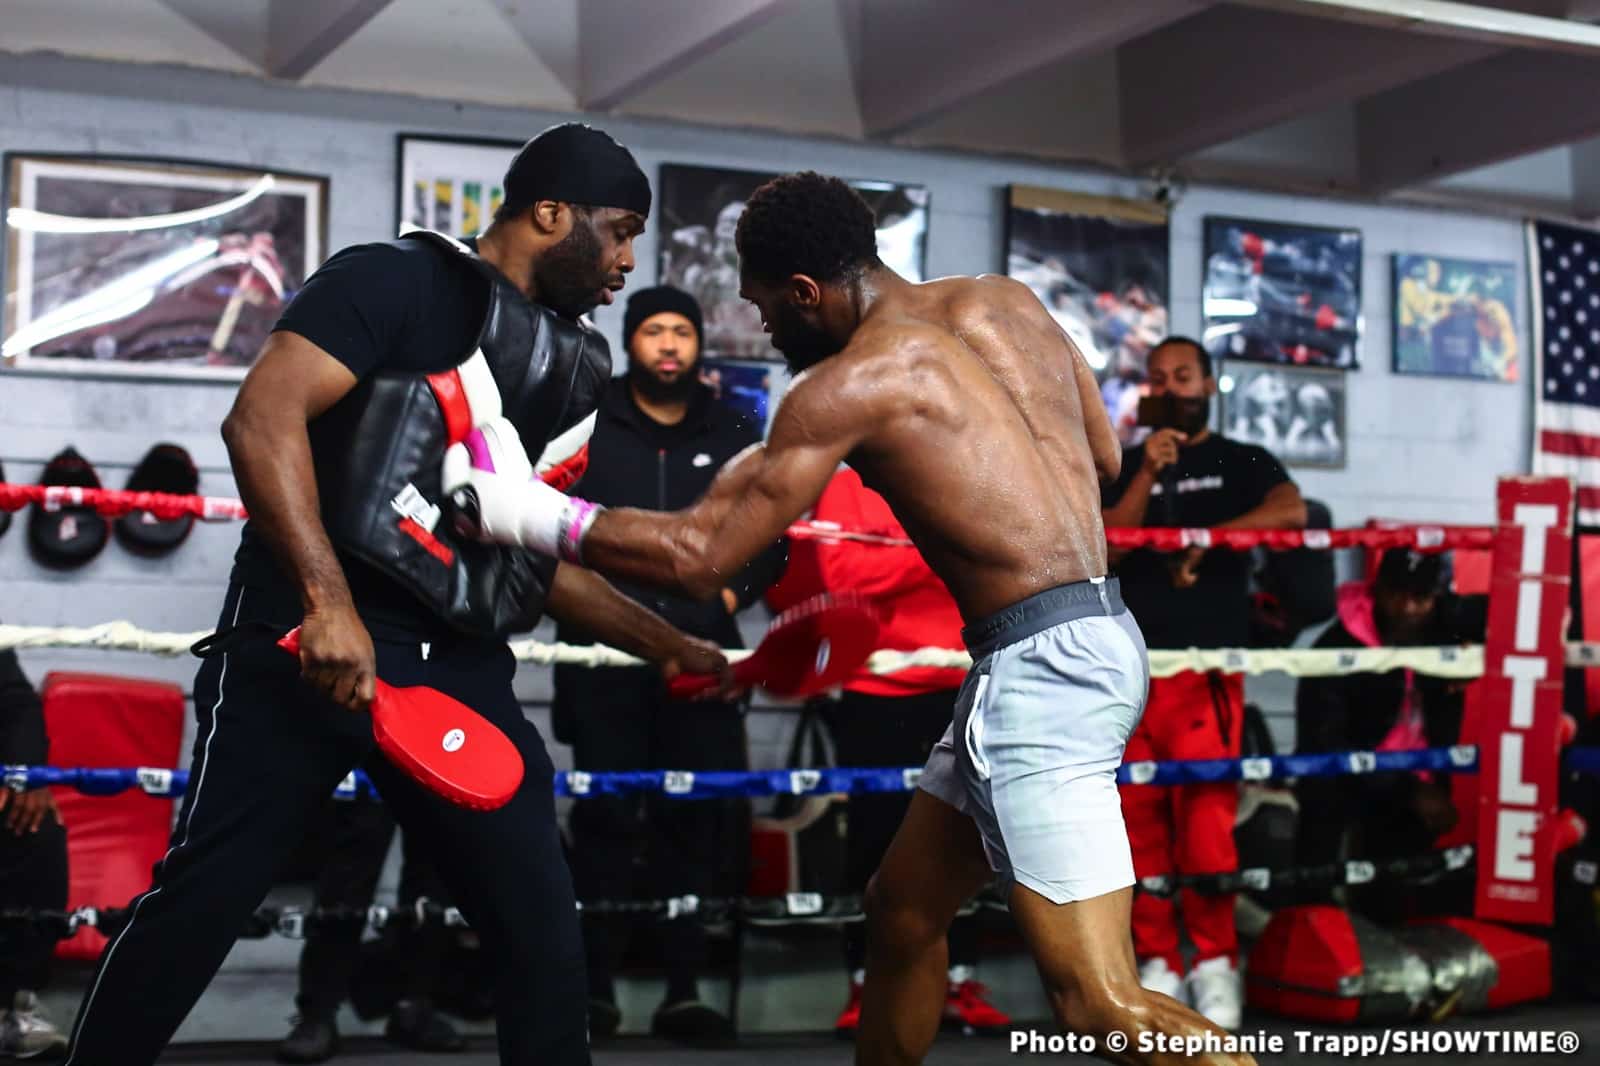 Image: Boots Ennis hoping to fight Spence or Crawford next after	Chukhadzhian